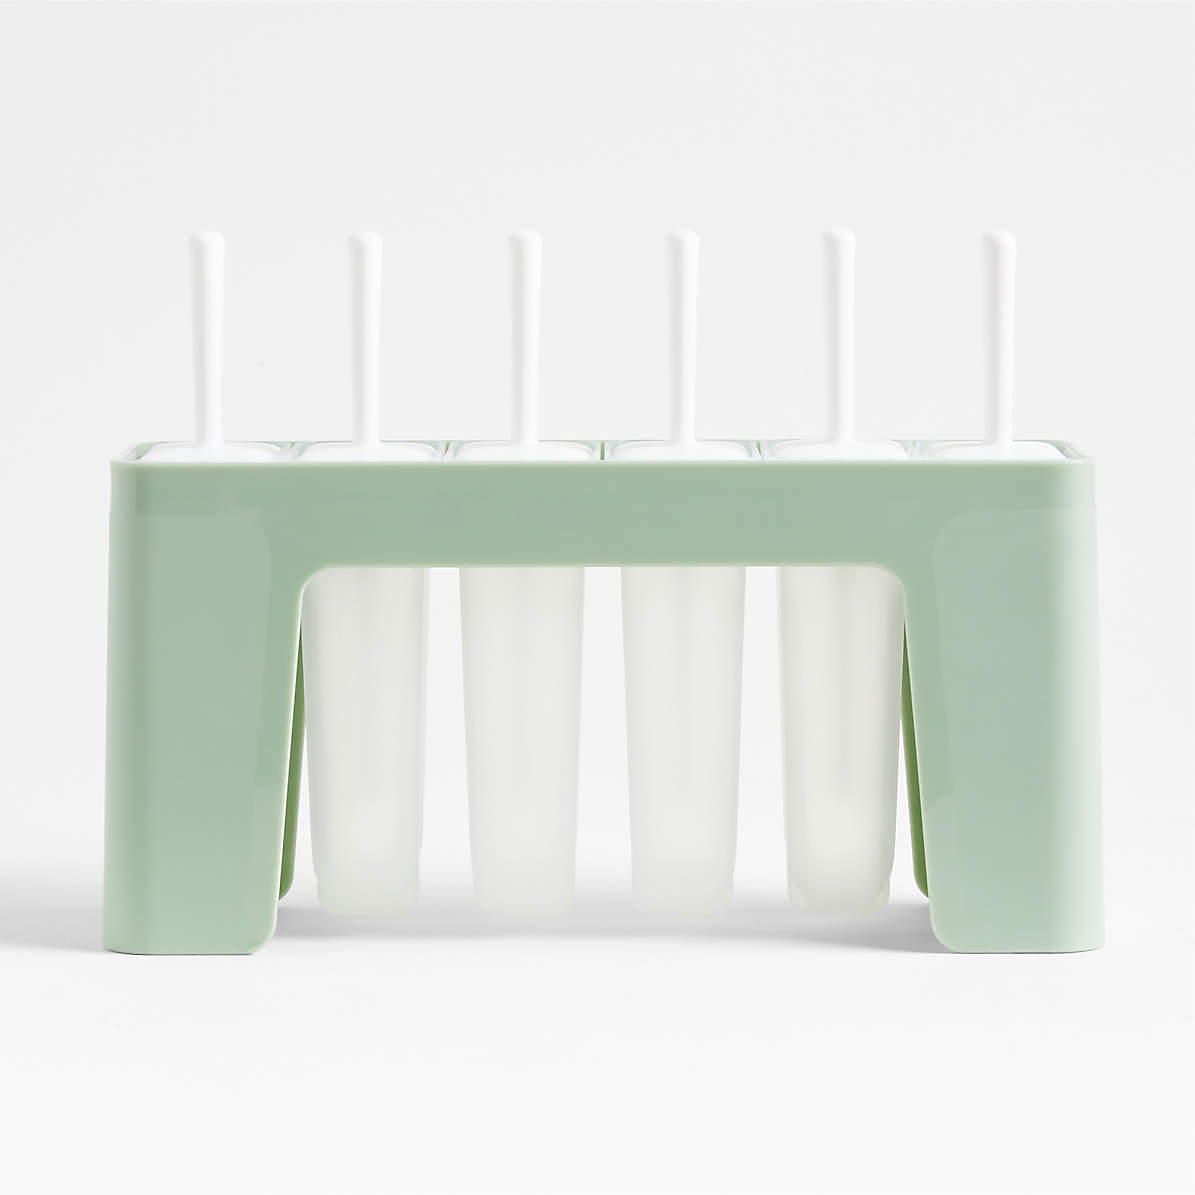 PopsicleLab - Popsicle Molds - The Bold